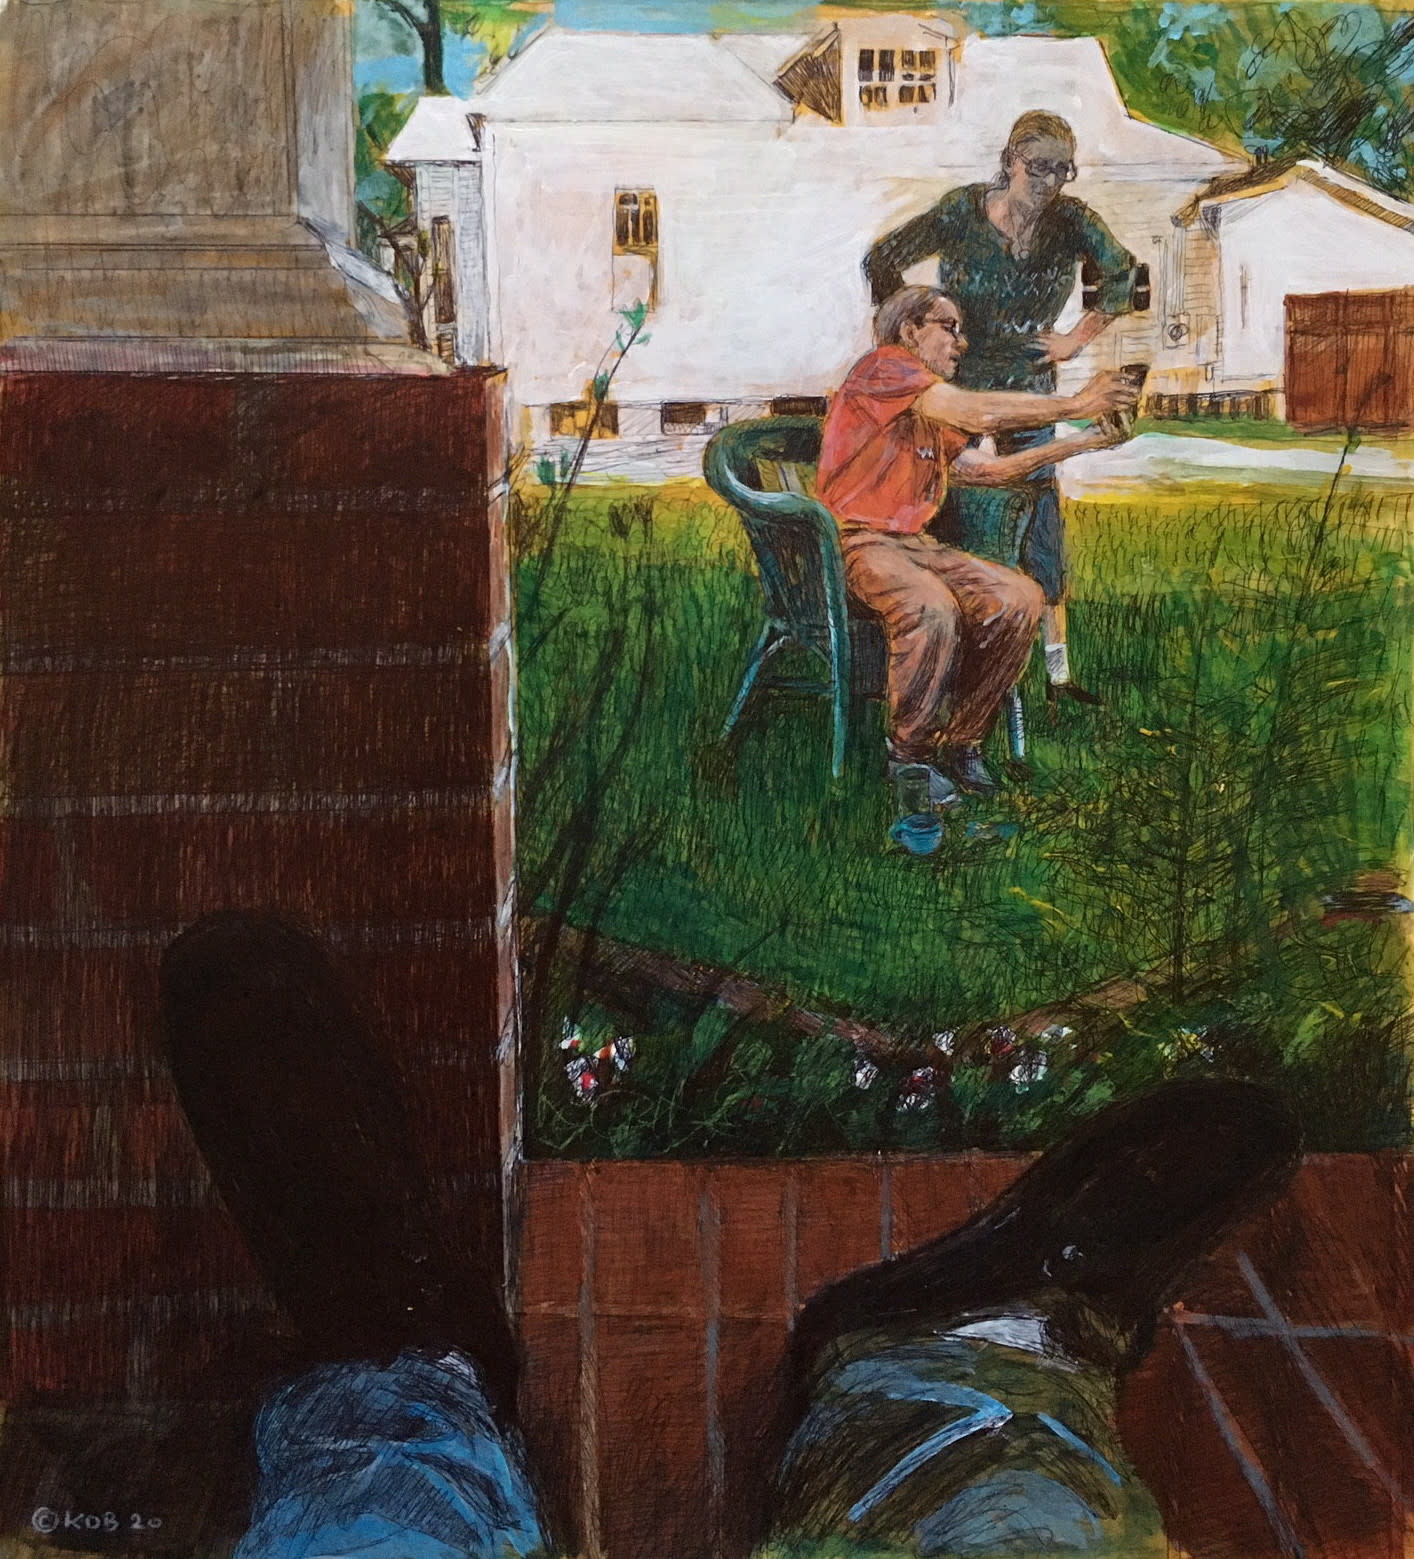 Kobrienview from the shoes17x19acrylicprismacolorinkonpaper 1600 jchs6v